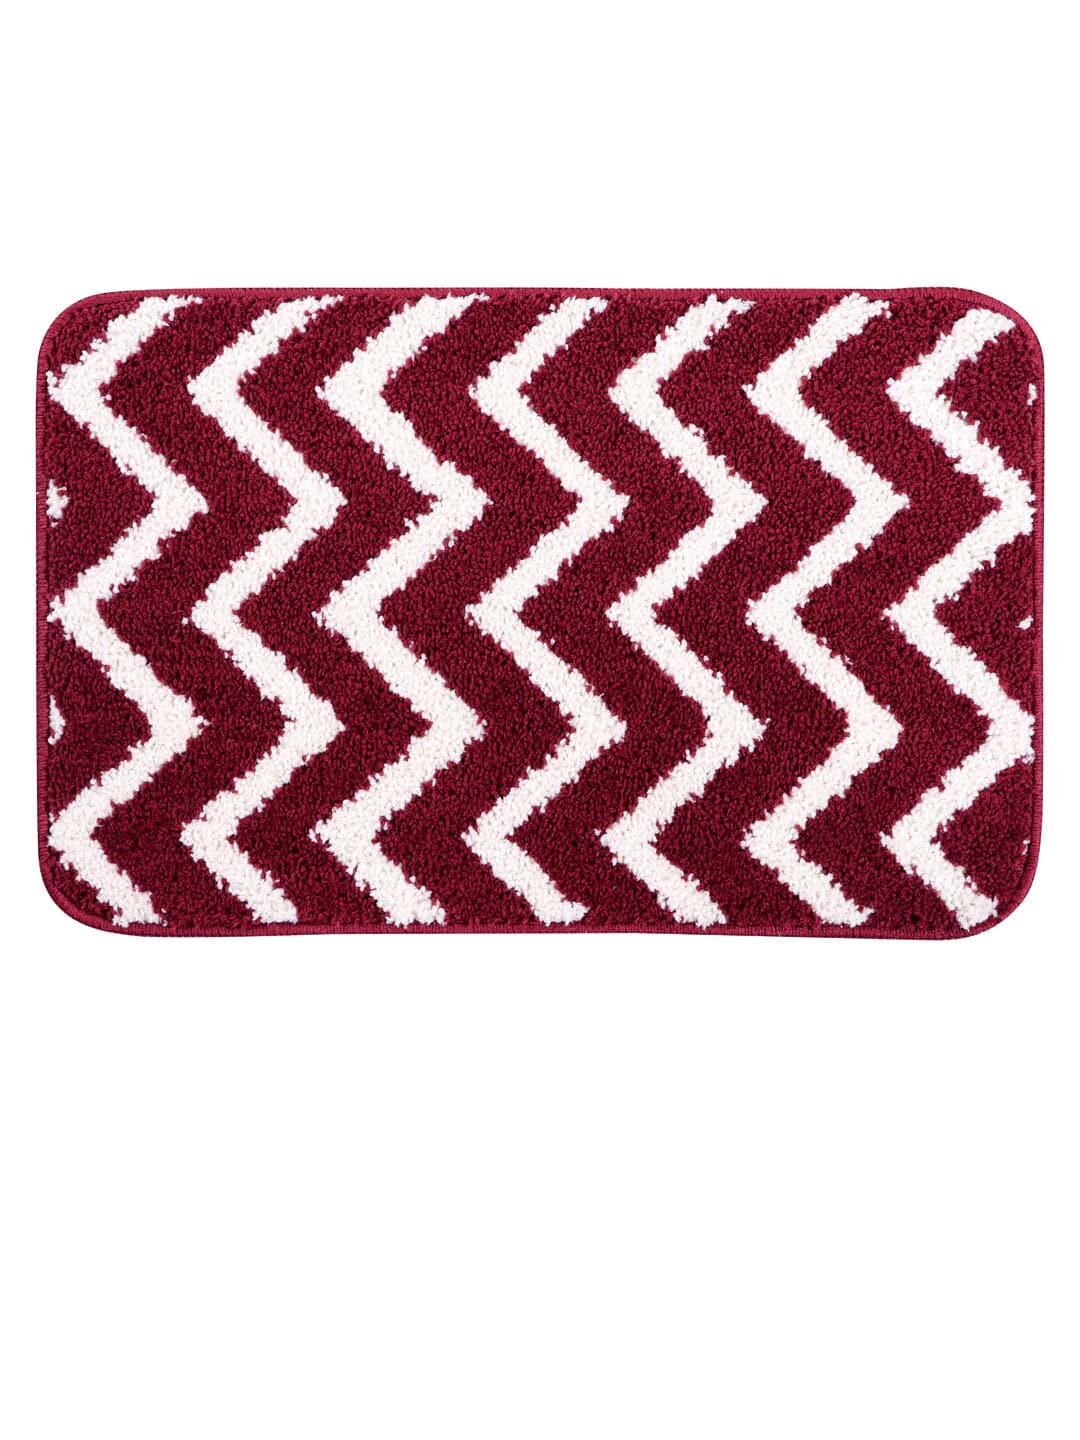 Pano Burgundy Printed 1000GSM Bath Rugs Price in India